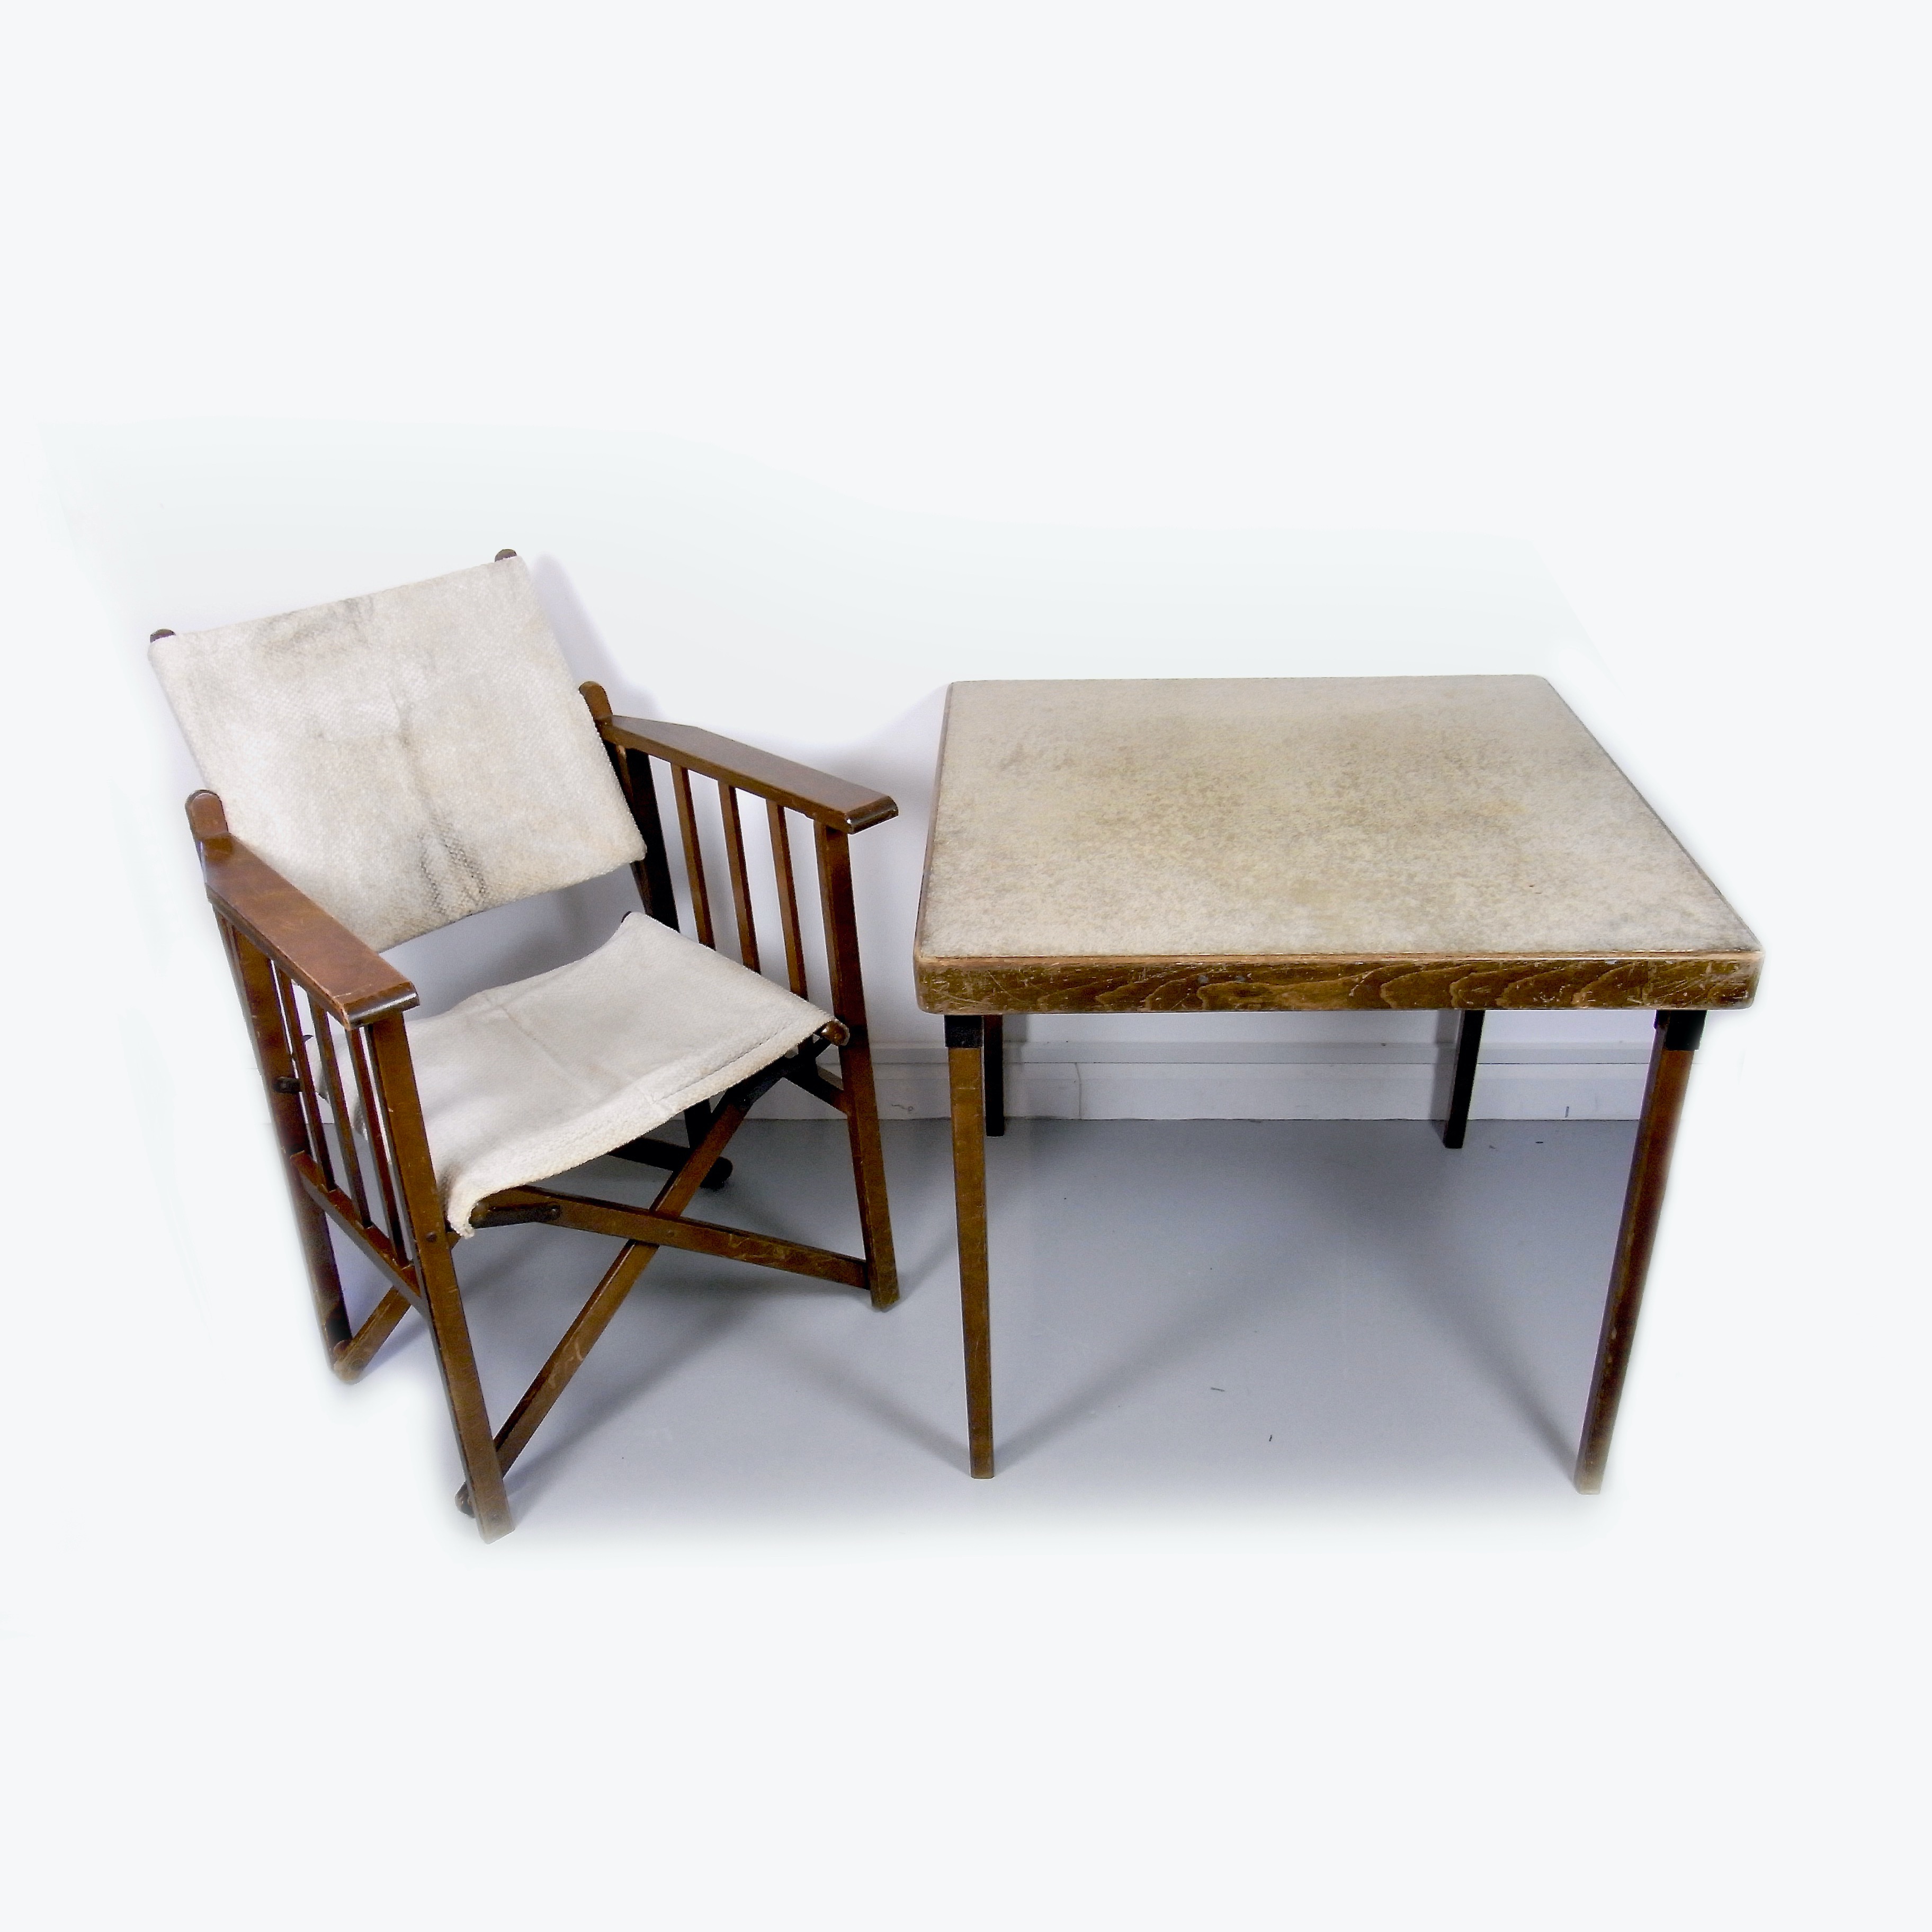 A delightful card table/occasional table and set of folding chairs, early/mid 20th century.